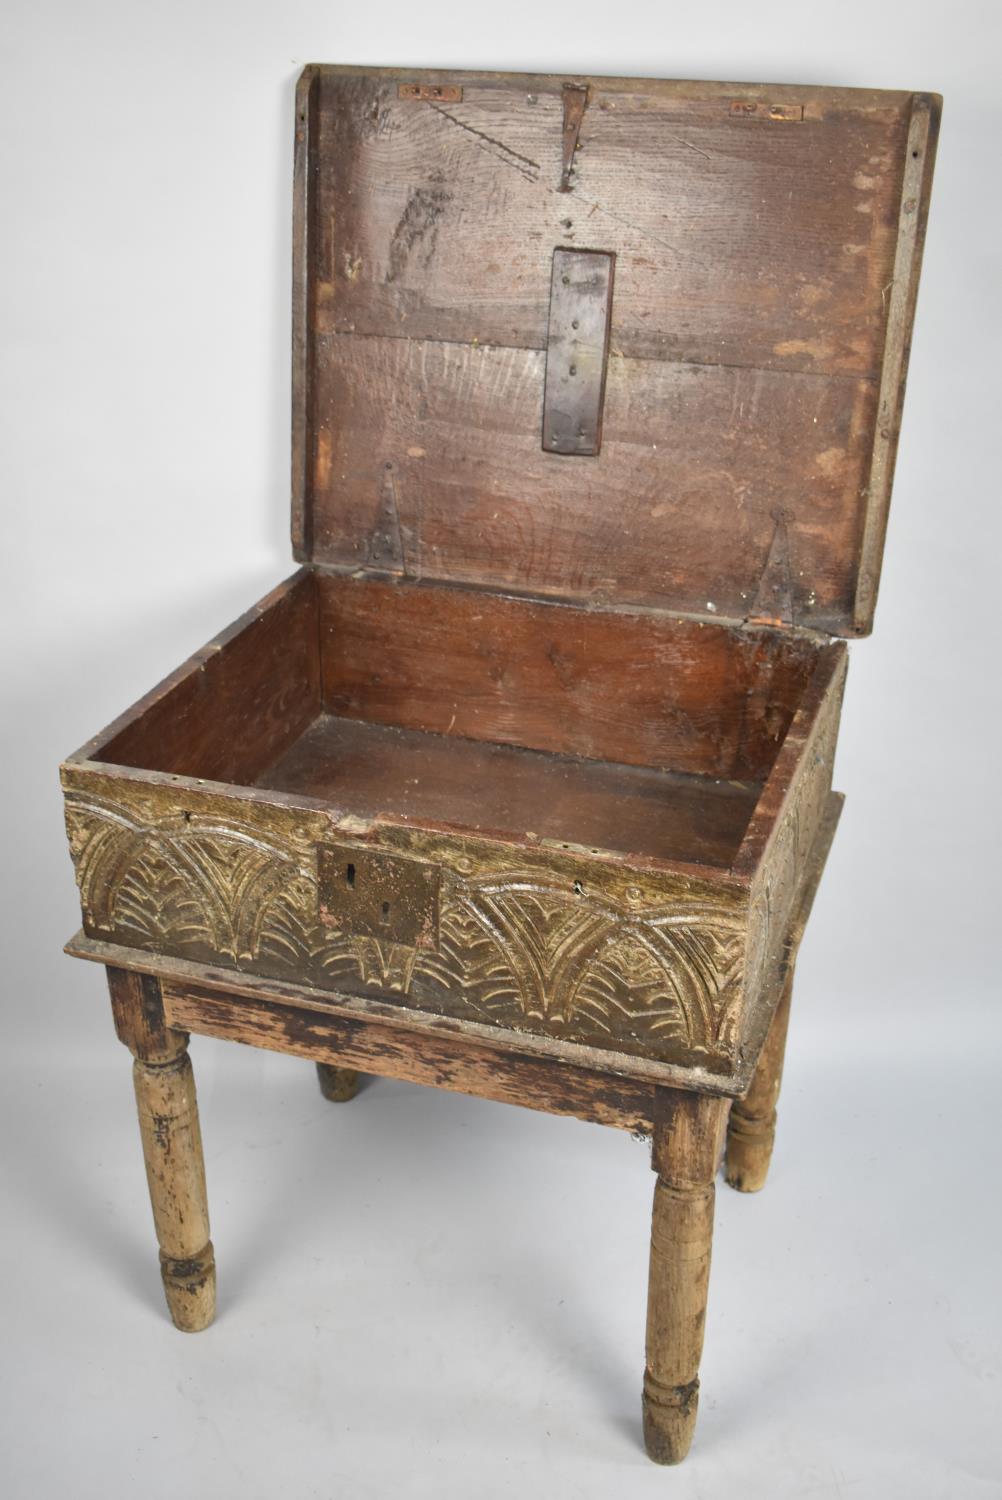 A Late 17th/Early 18th Century Carved Welsh Oak Boarded Bible Box on Stand, 66x53x71cms High - Image 3 of 3